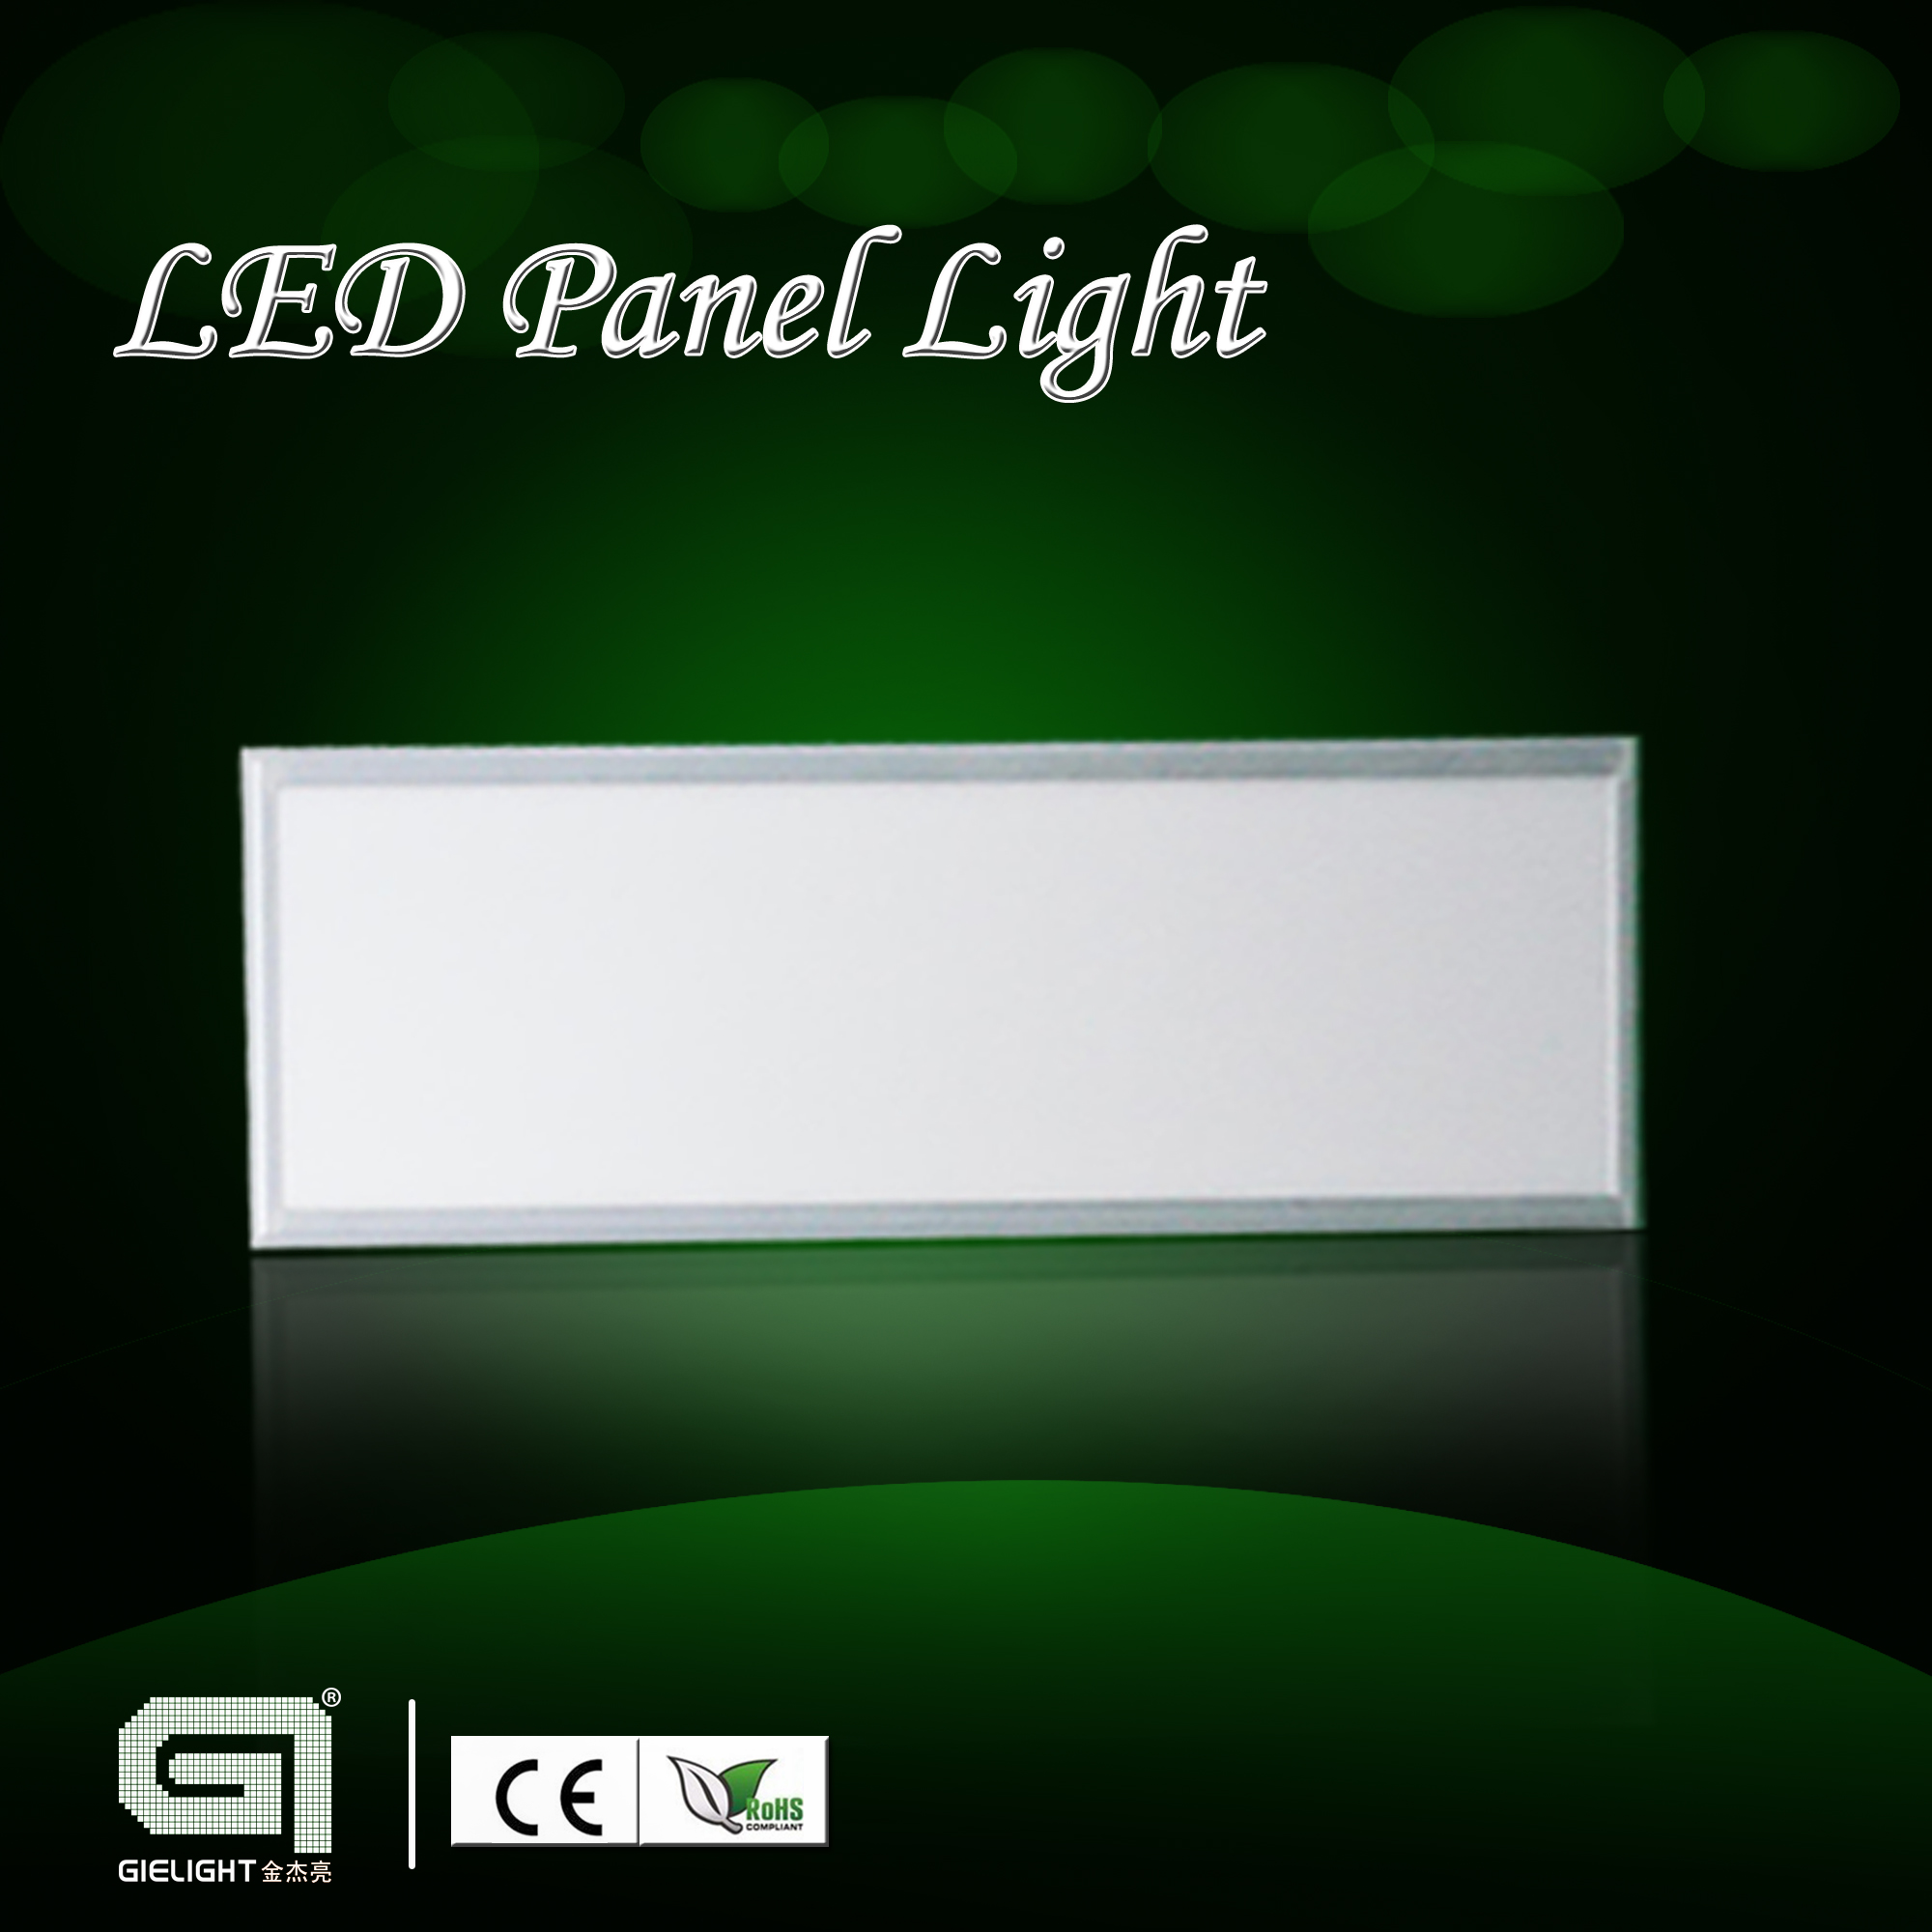 suquare panel light led 300*600mm for meeting room, office room